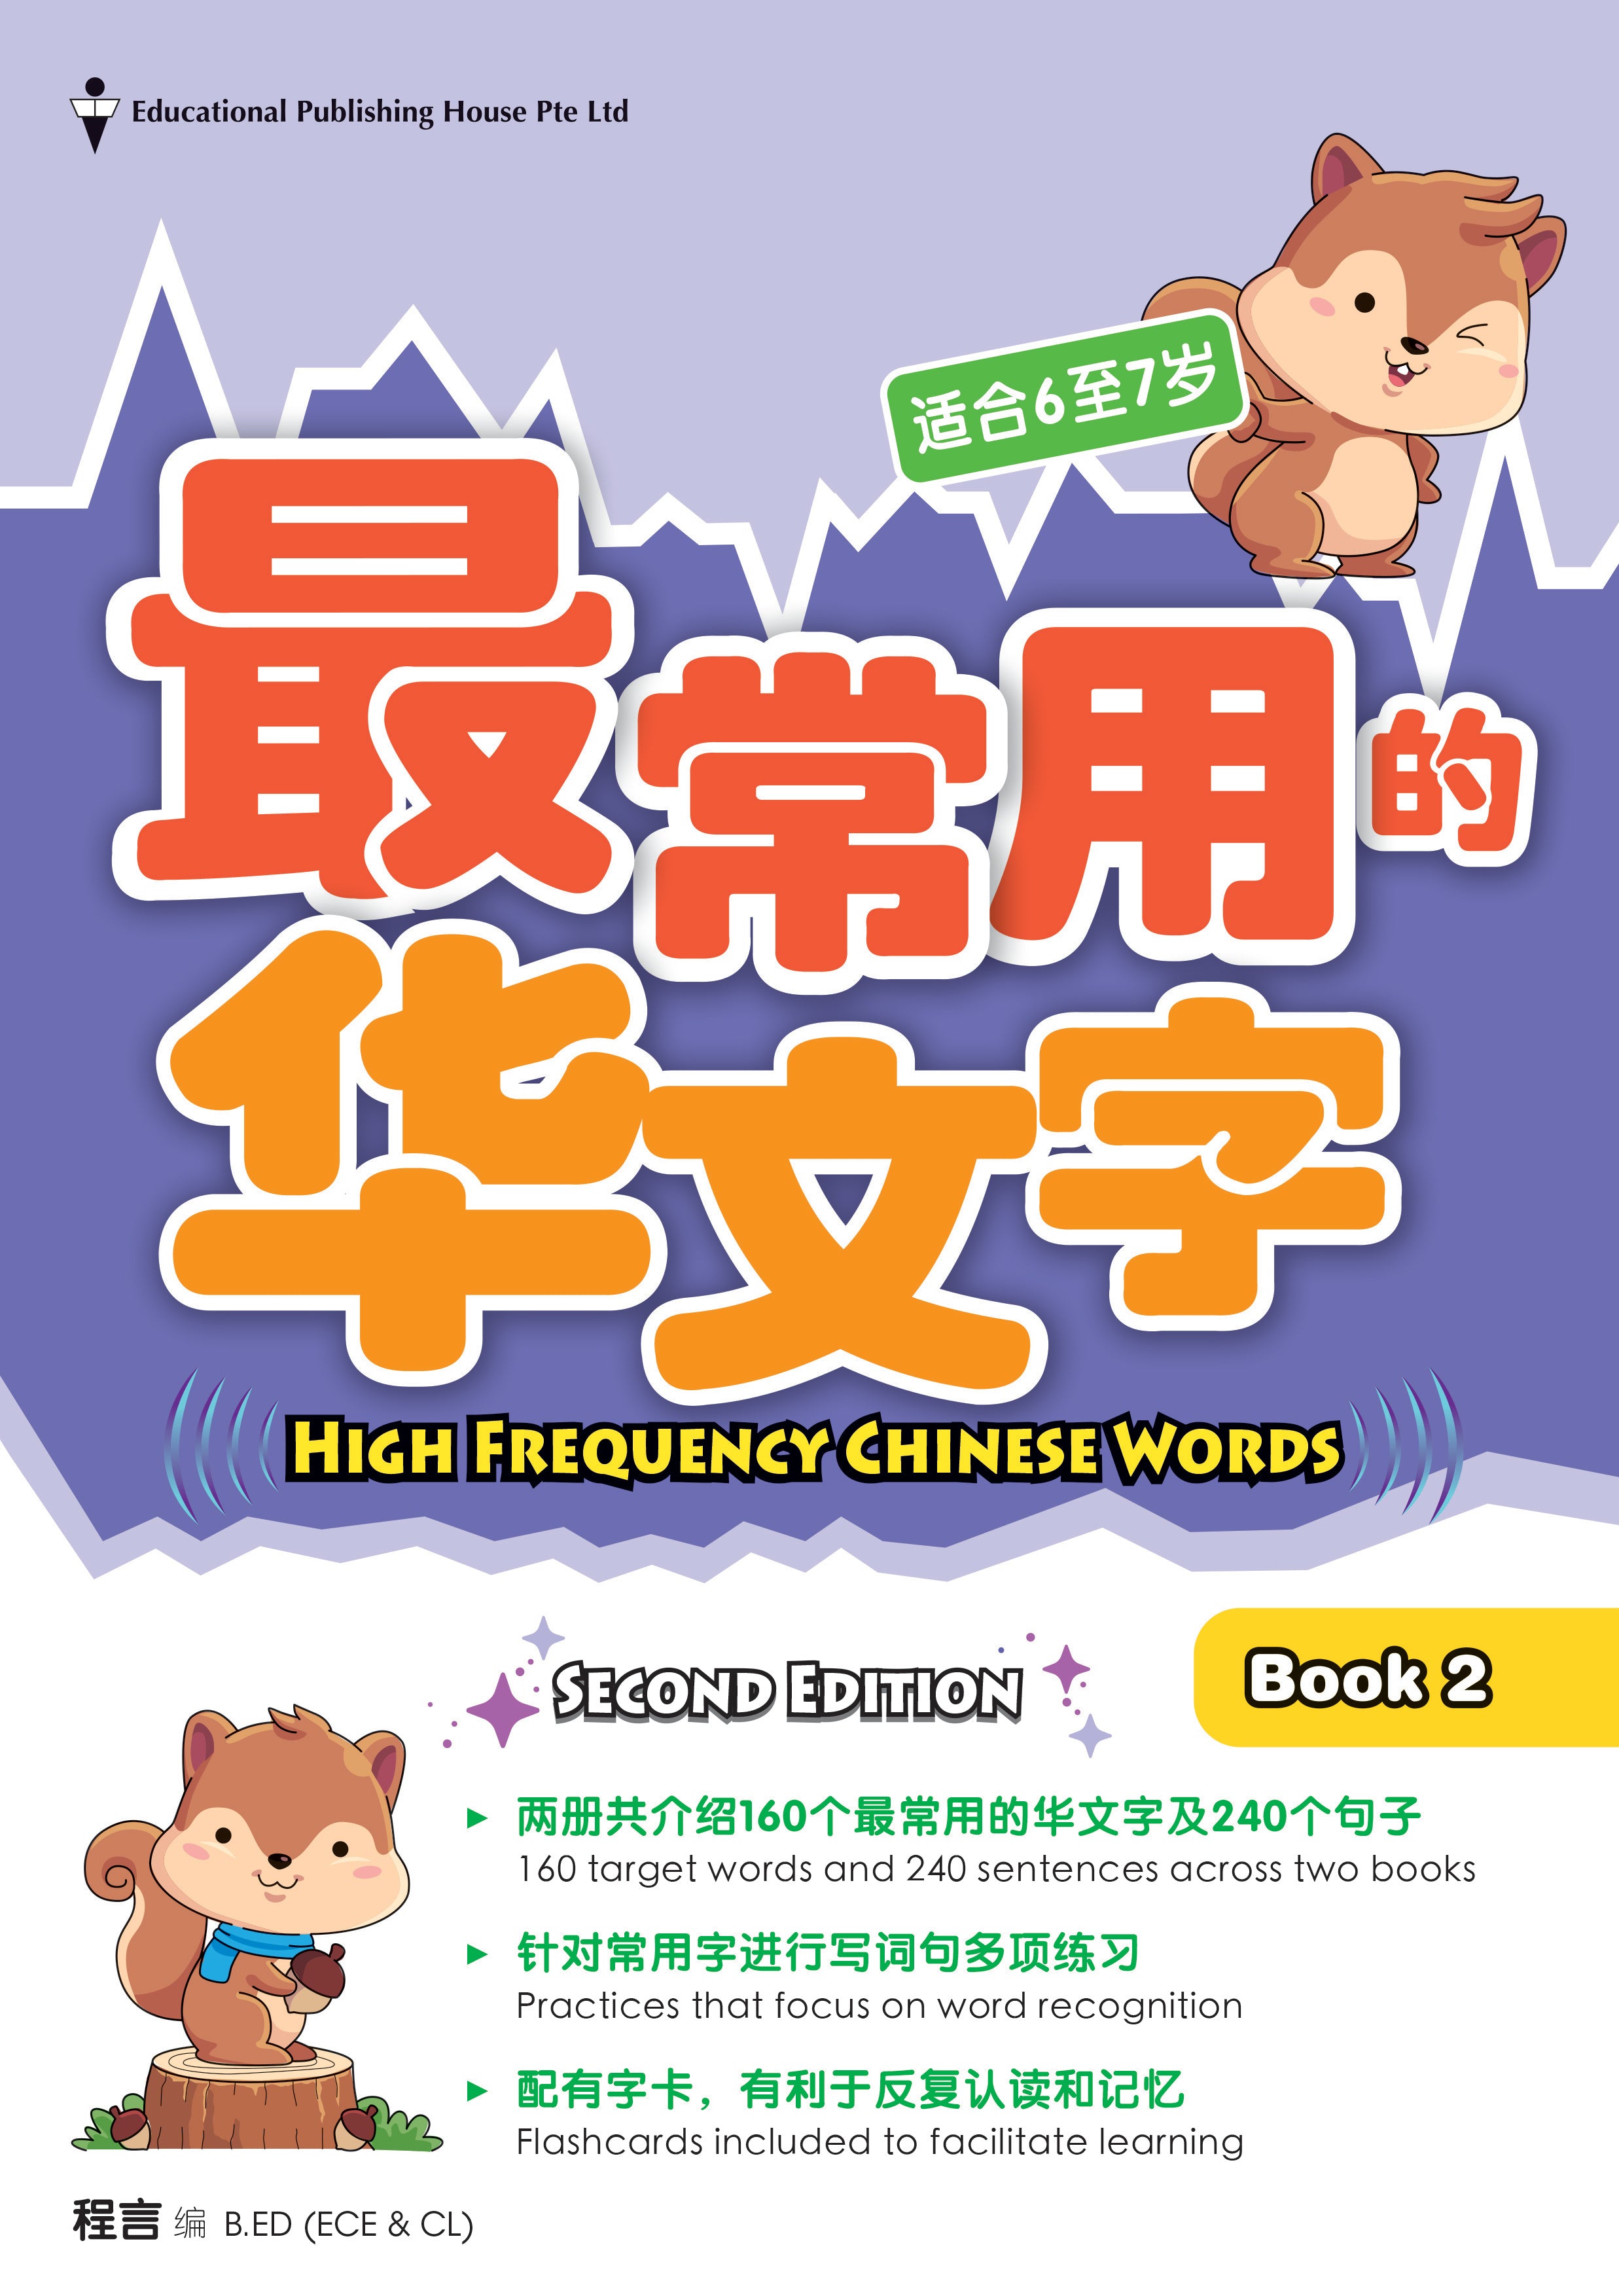 High Frequency Chinese Words Book 2 (ages 6-7)